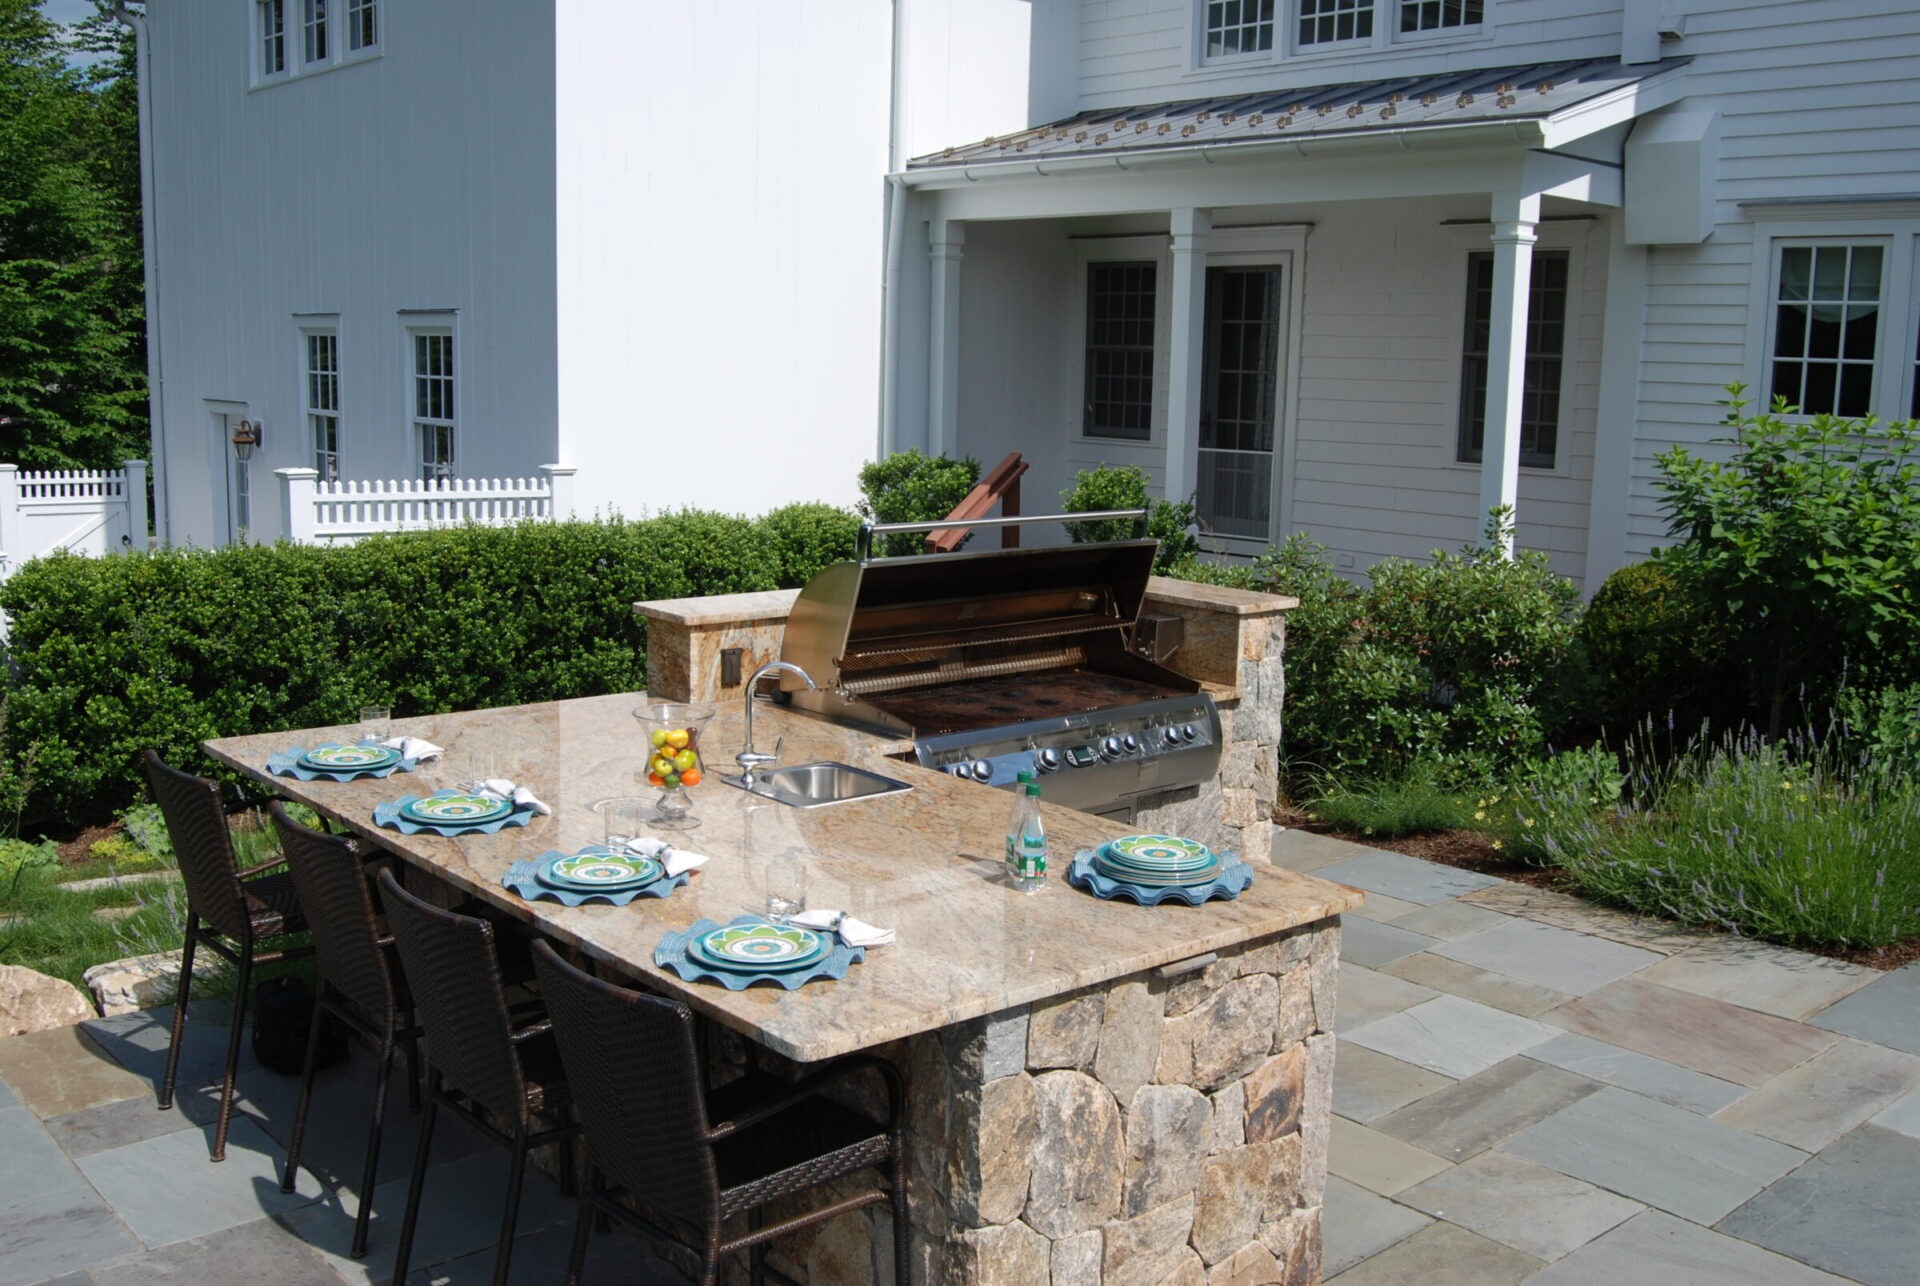 An outdoor kitchen with a grill, sink, and dining area set against a white house, adorned with stone countertops and surrounded by greenery.